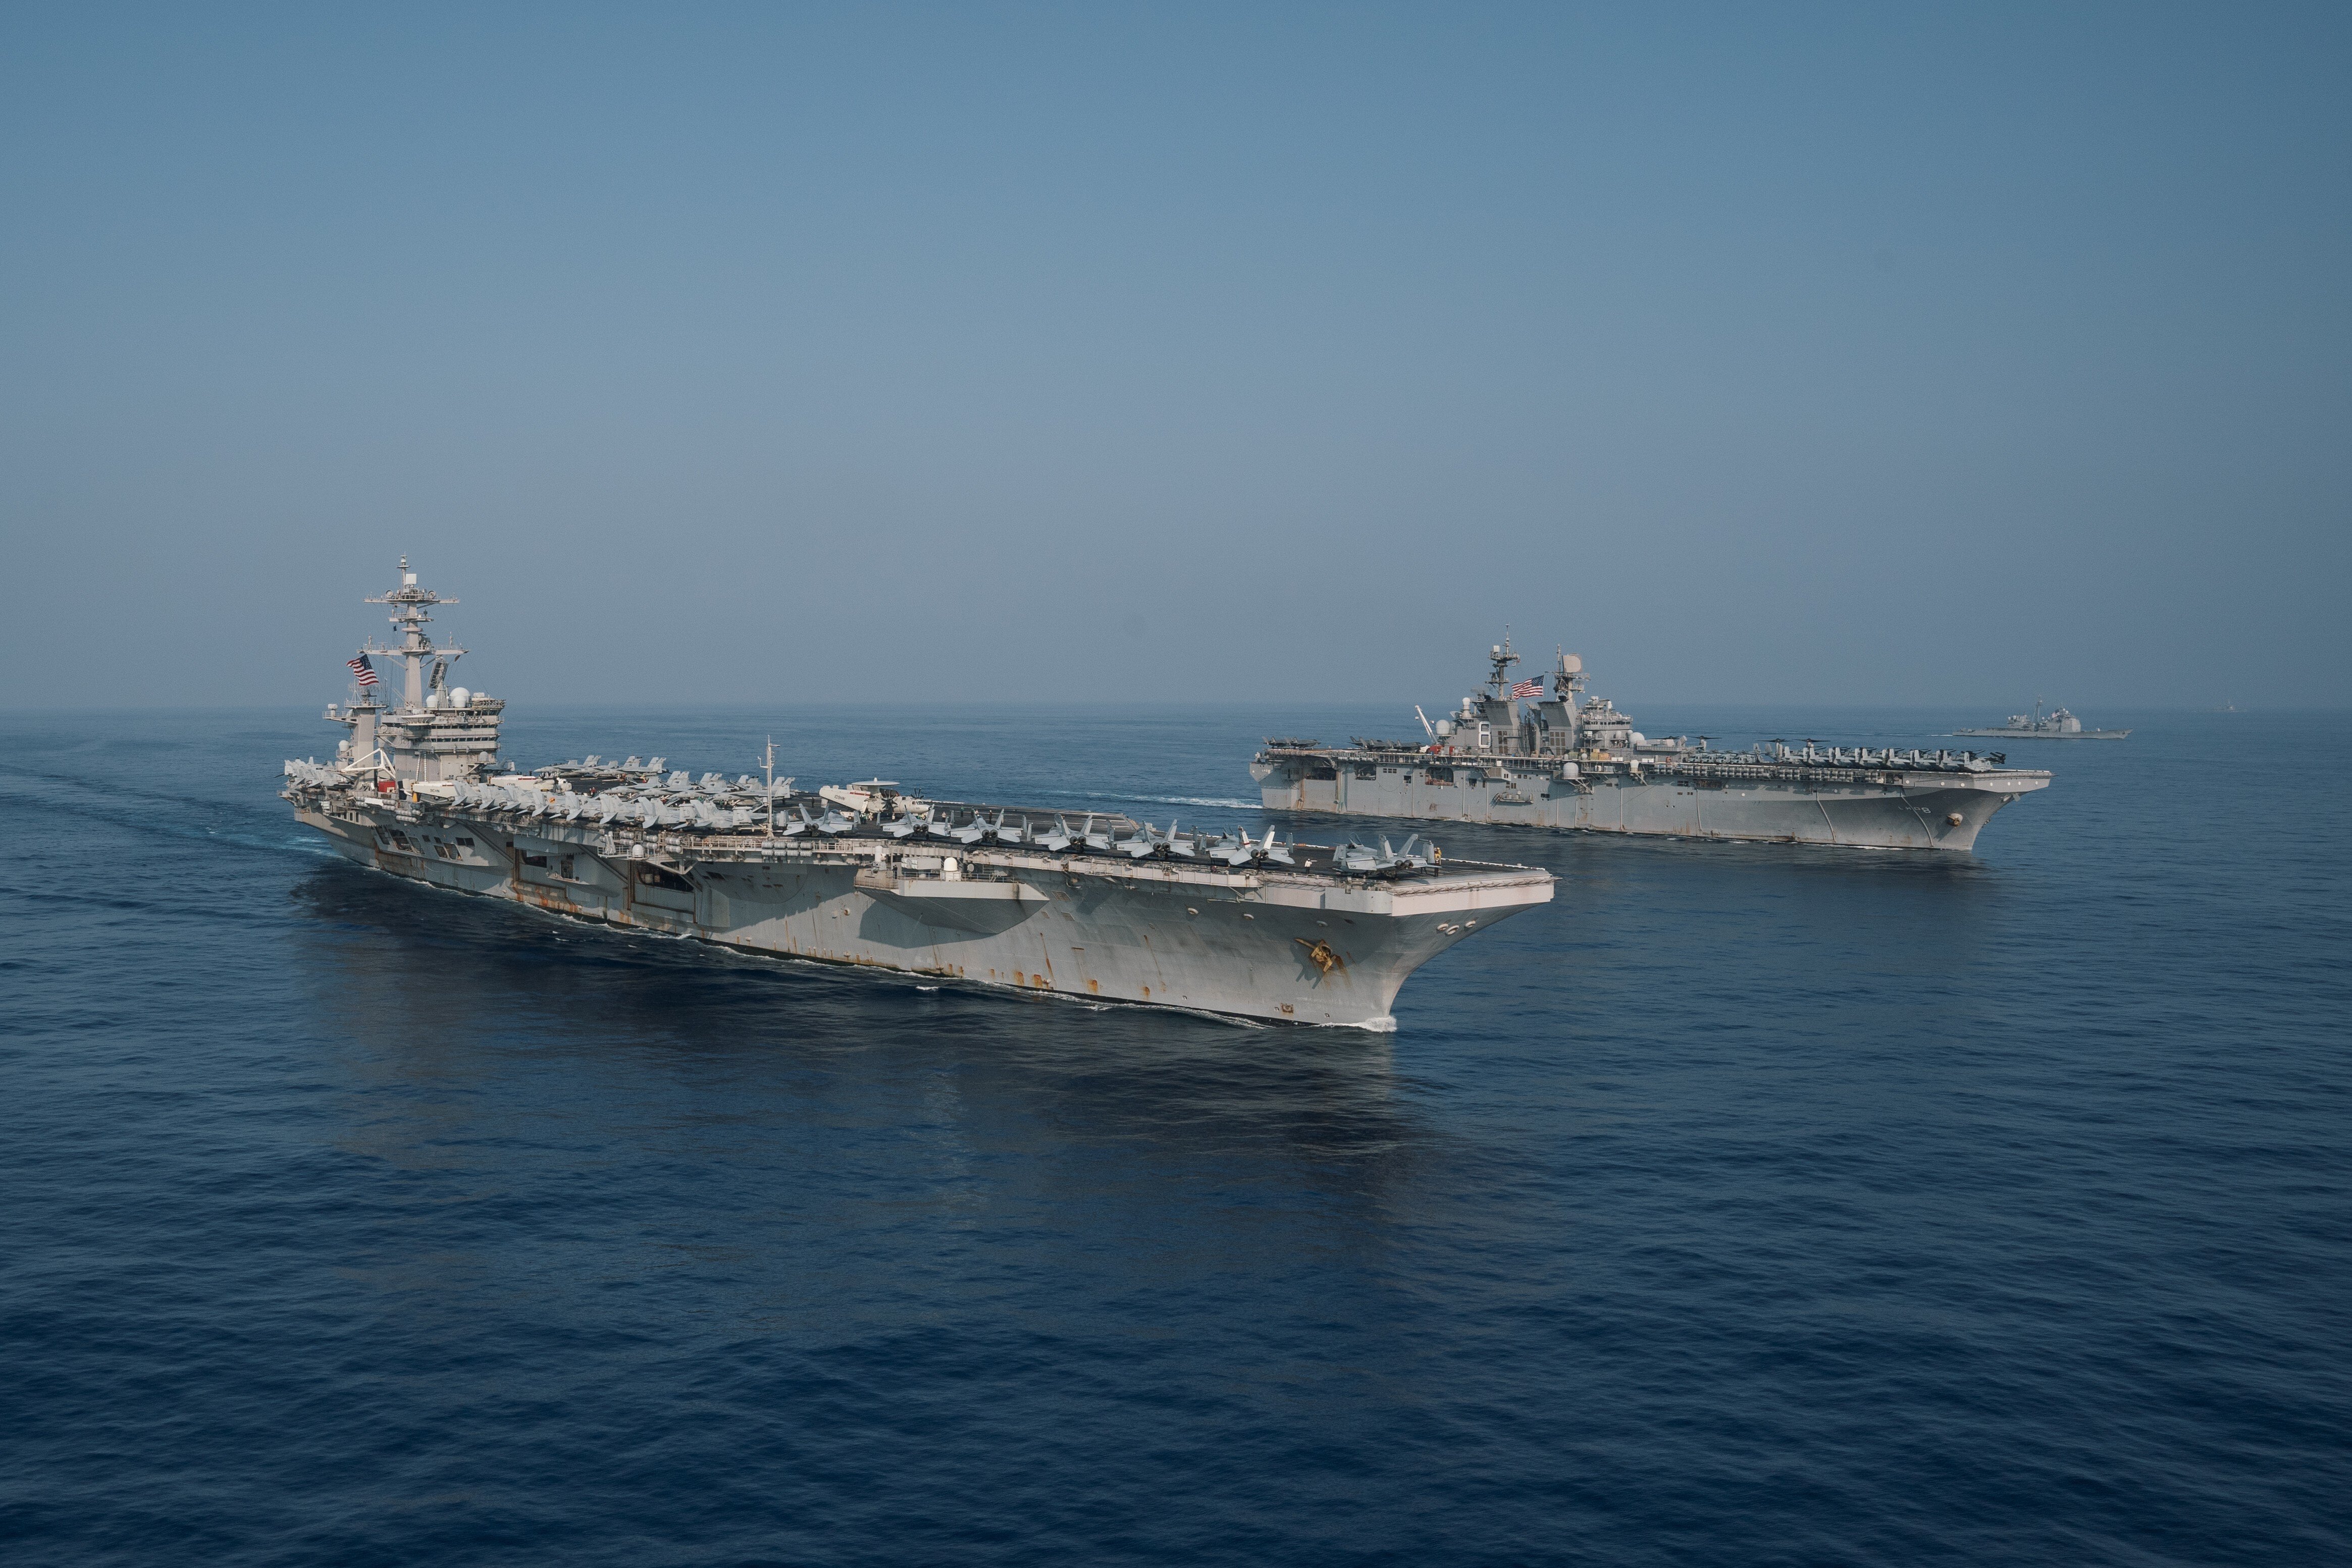 The Theodore Roosevelt Carrier Strike Group transits in formation with the Makin Island Amphibious Ready Group in the South China Sea. File photo: US Navy via AP